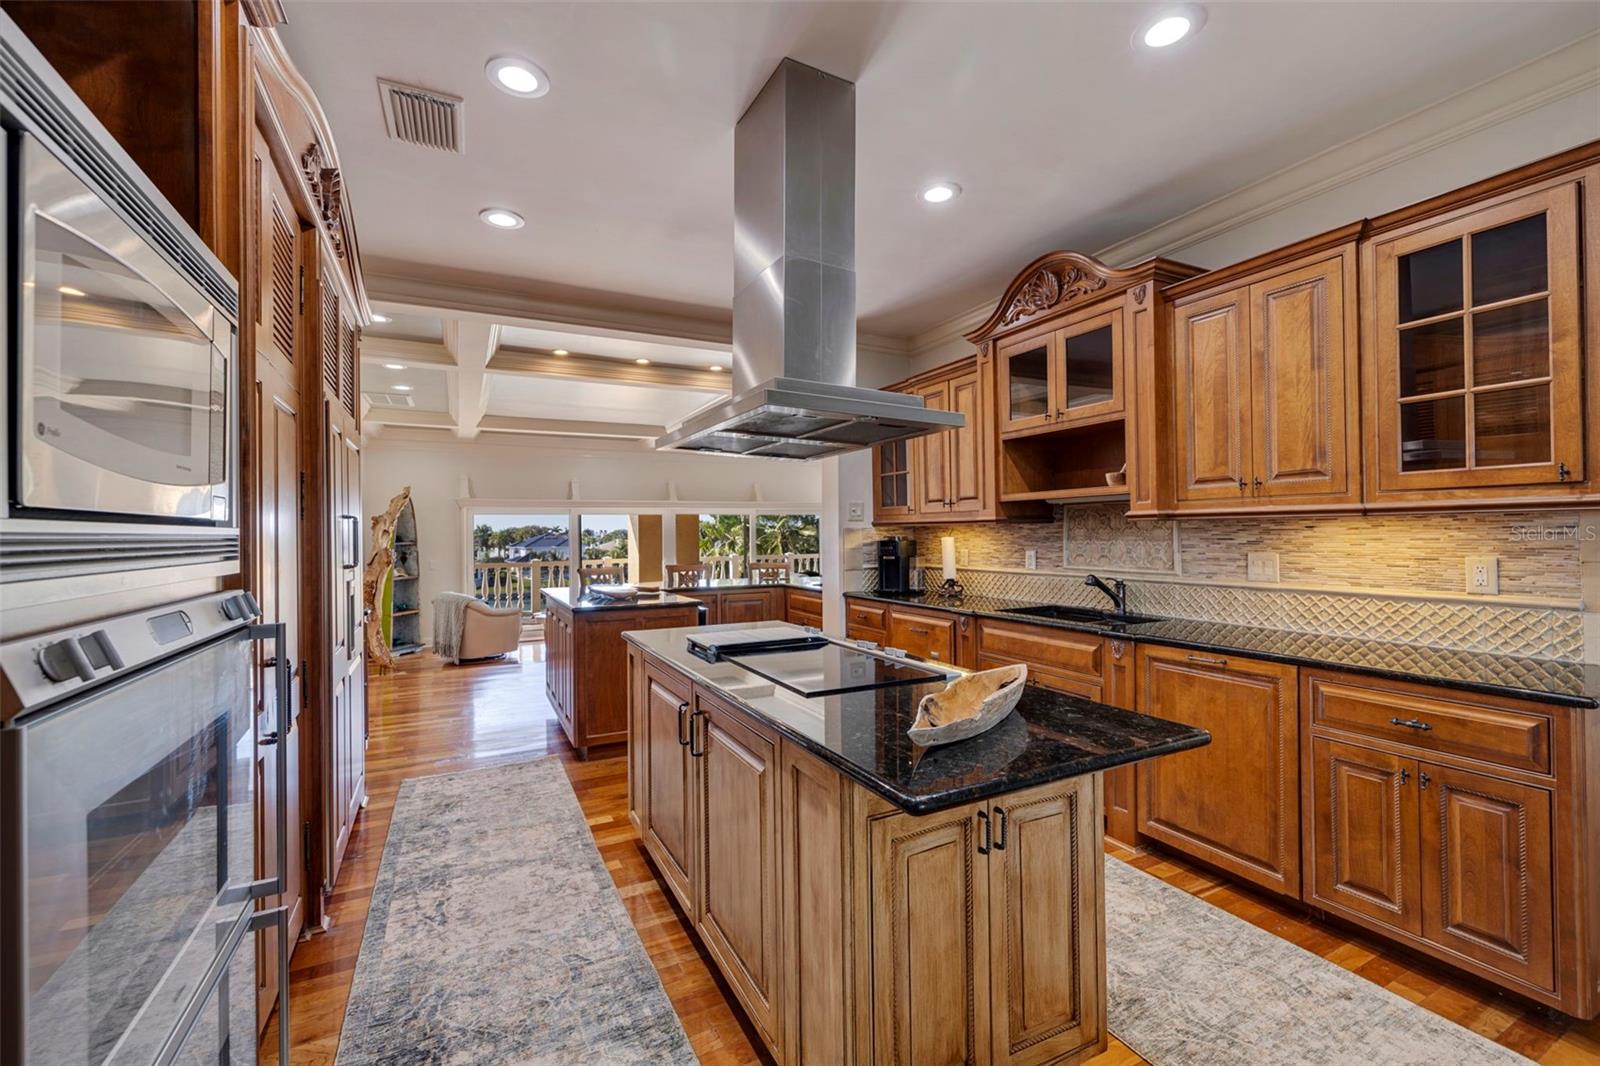 High end kitchen appliances including a huge walk in pantry and free standing ice maker.